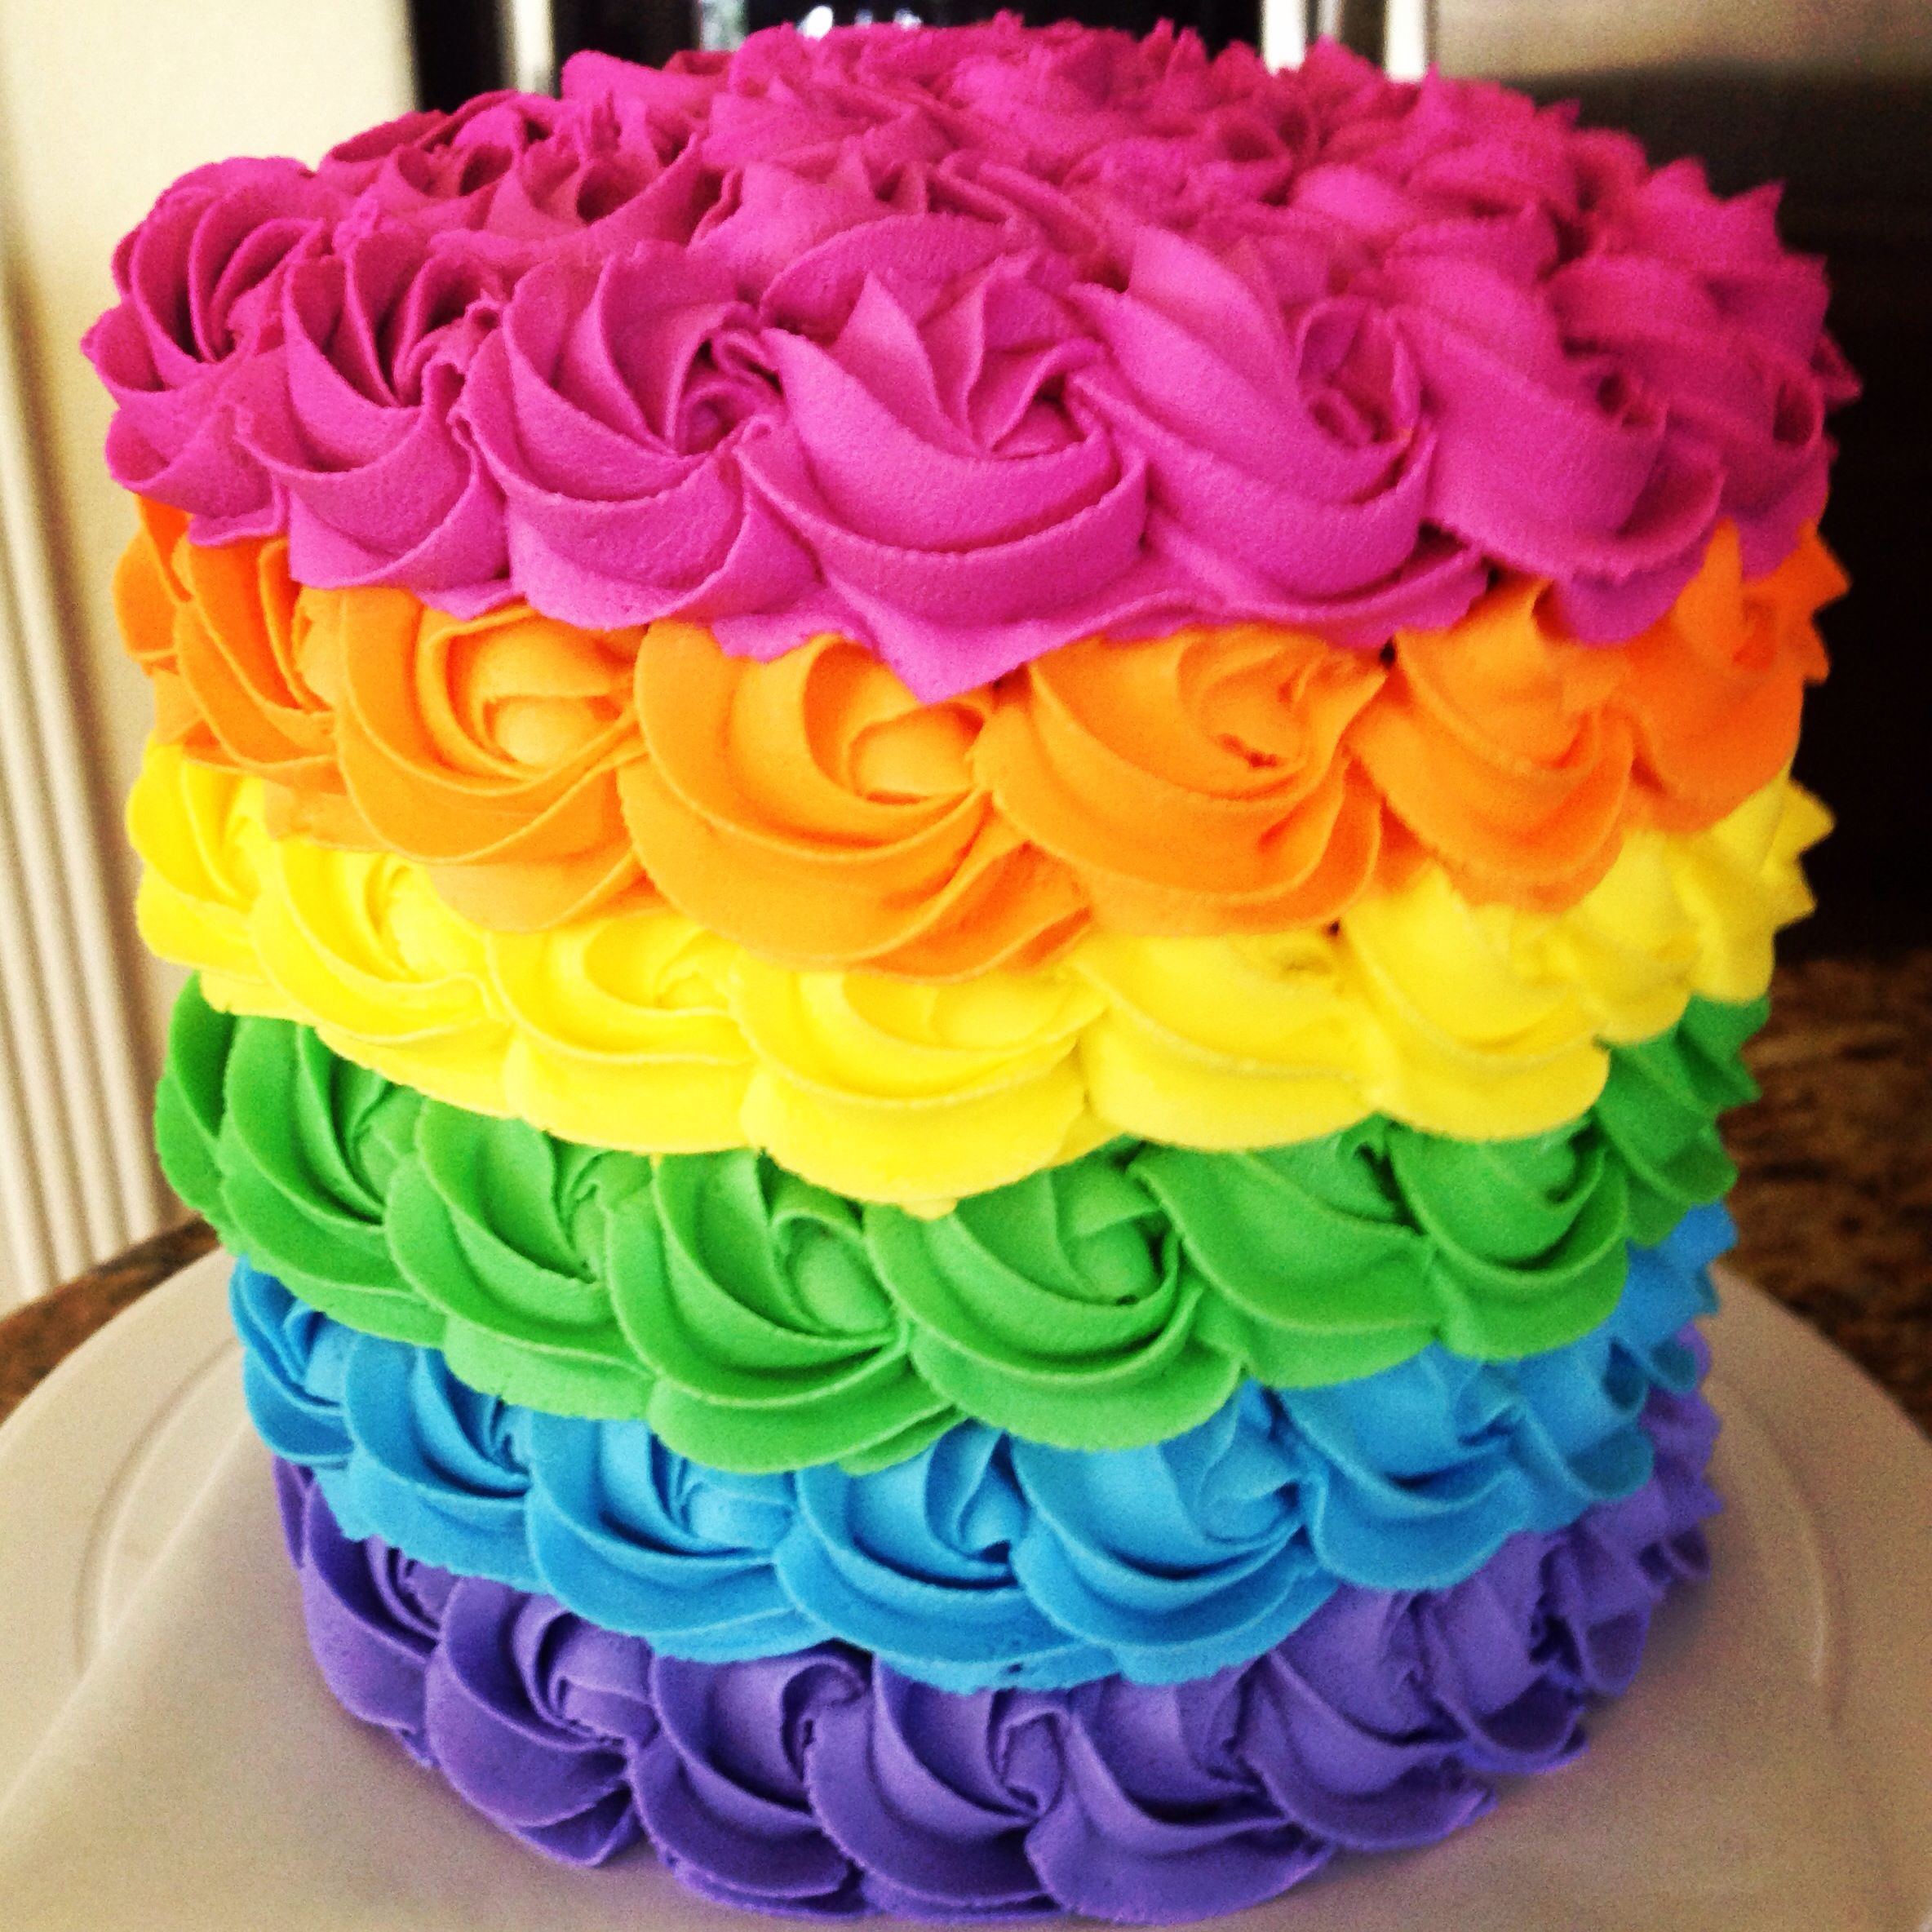 Colorful Birthday Cakes
 Rainbow cake 2 Stunning inside and out Moist almond